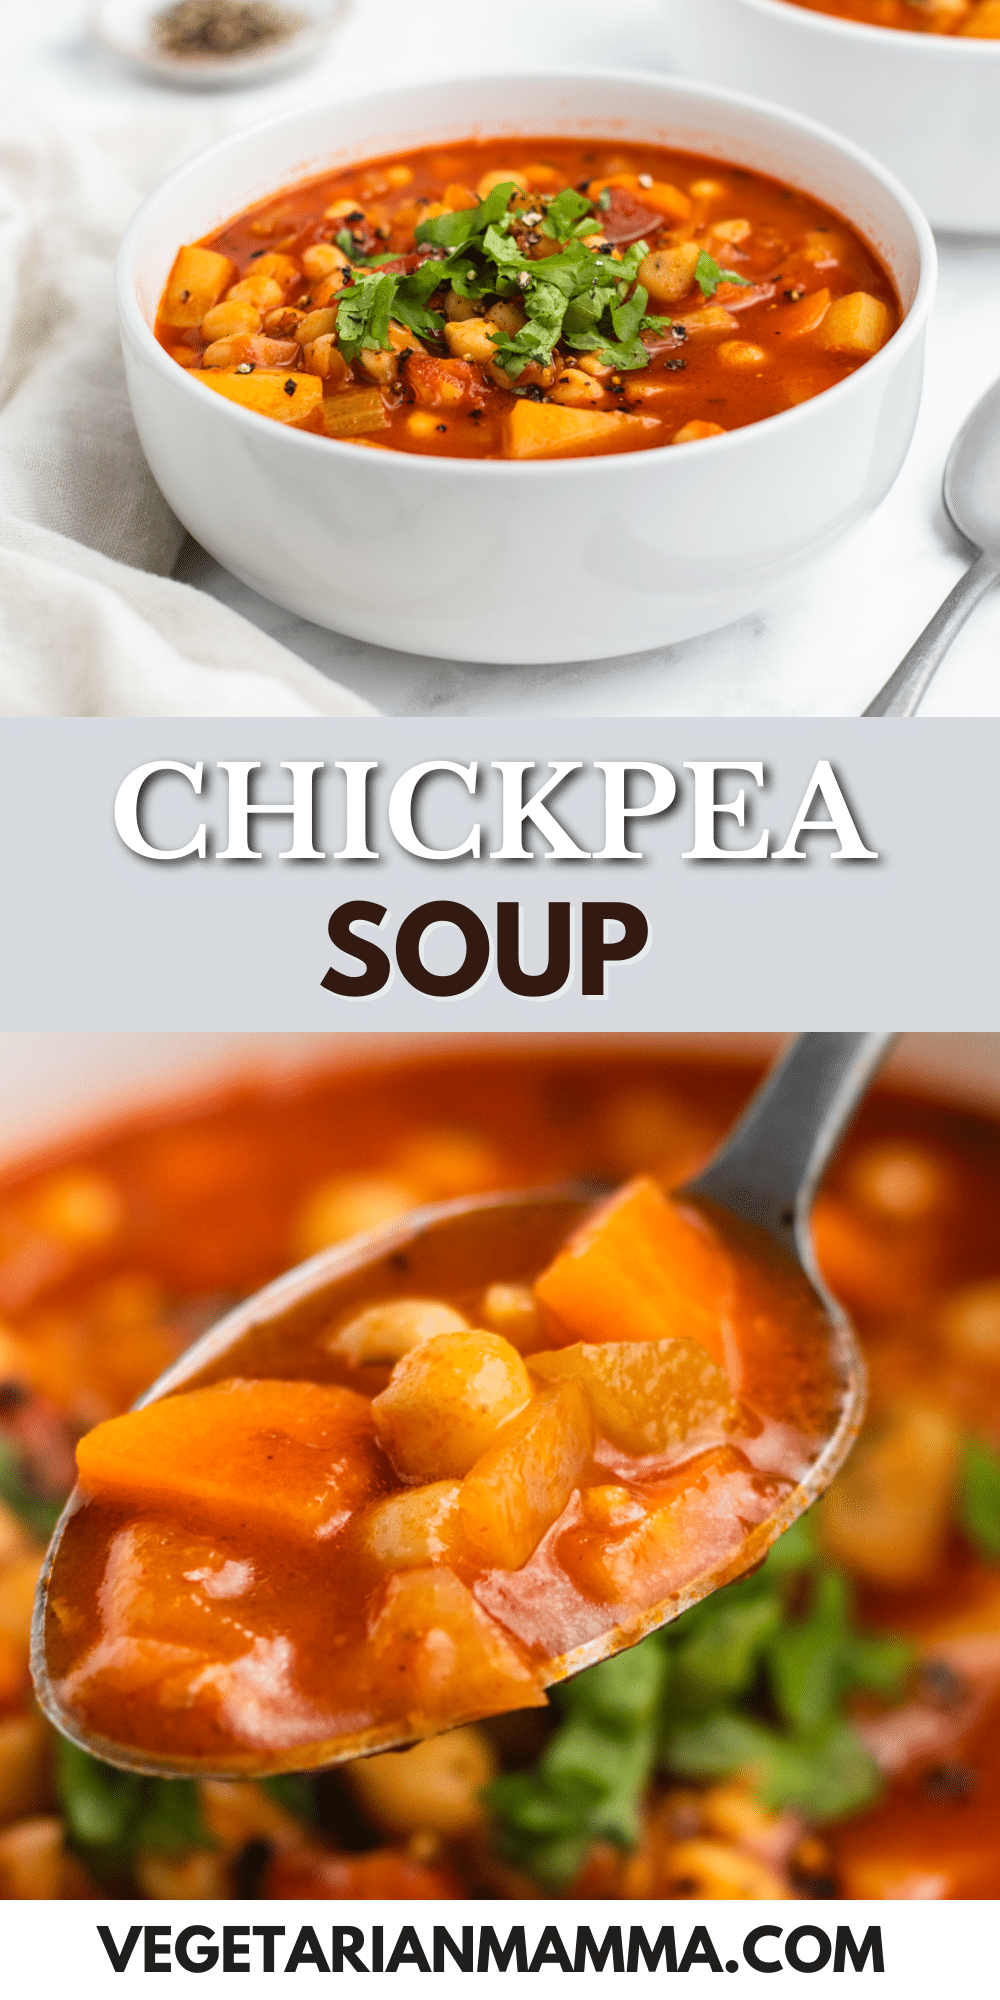 You are going to love this hearty, tomato-based Chickpea Soup! It's filling and rich with creamy beans and potatoes, perfectly seasoned with garlic and herbs, and cooked in less than an hour on the stovetop.